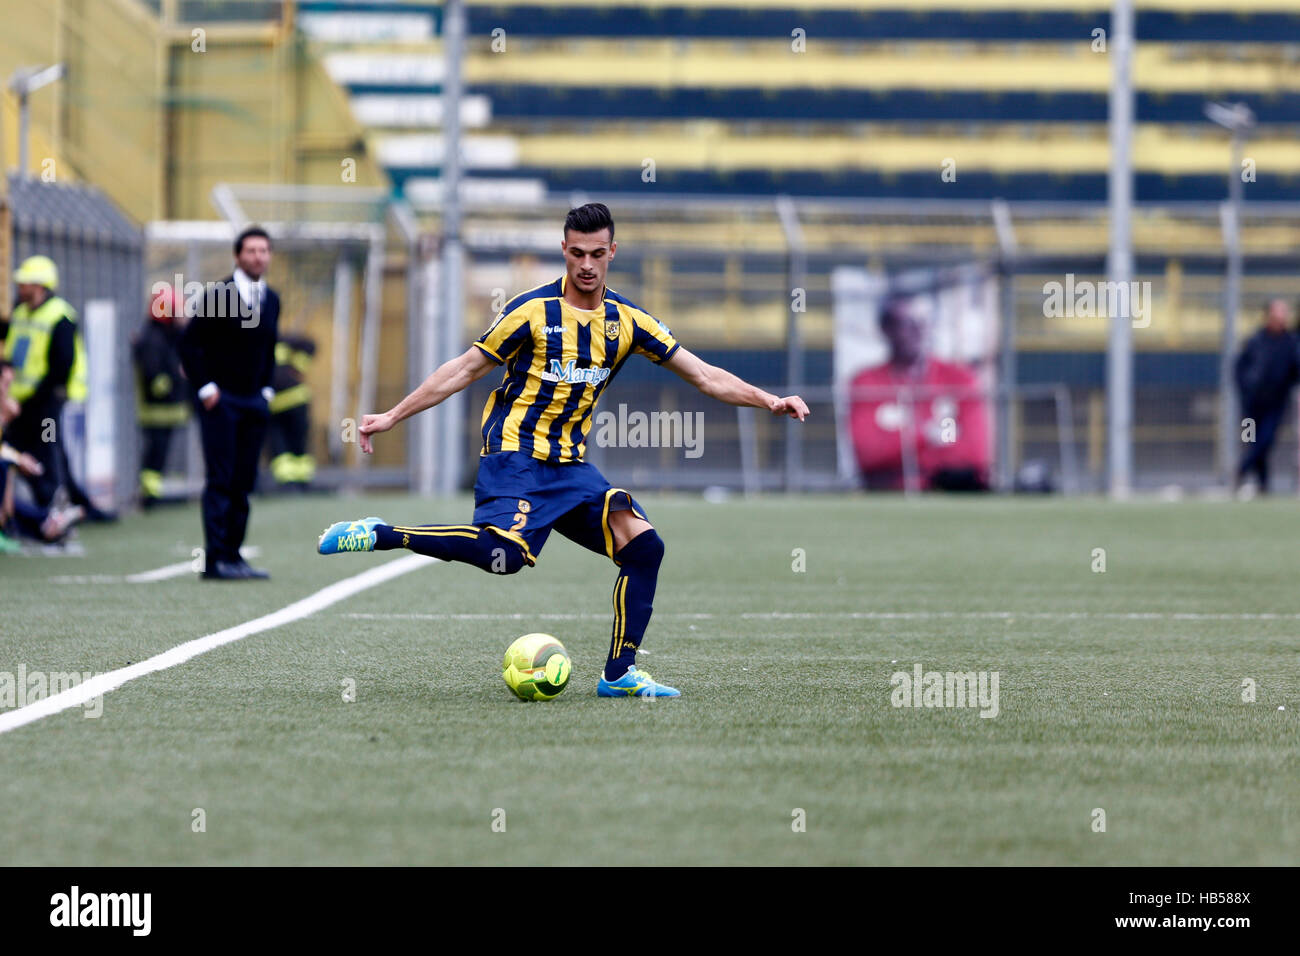 TOMMASO CANCELLOTTI (TER) during the Lega Pro round C between JUVE STABIA and VIRTUS FRANCAVILLA at Romeo Menti Stadium in Castellammare di Stabia (Italy). (Photo by Emanuele Sessa / Pacific Press) Stock Photo